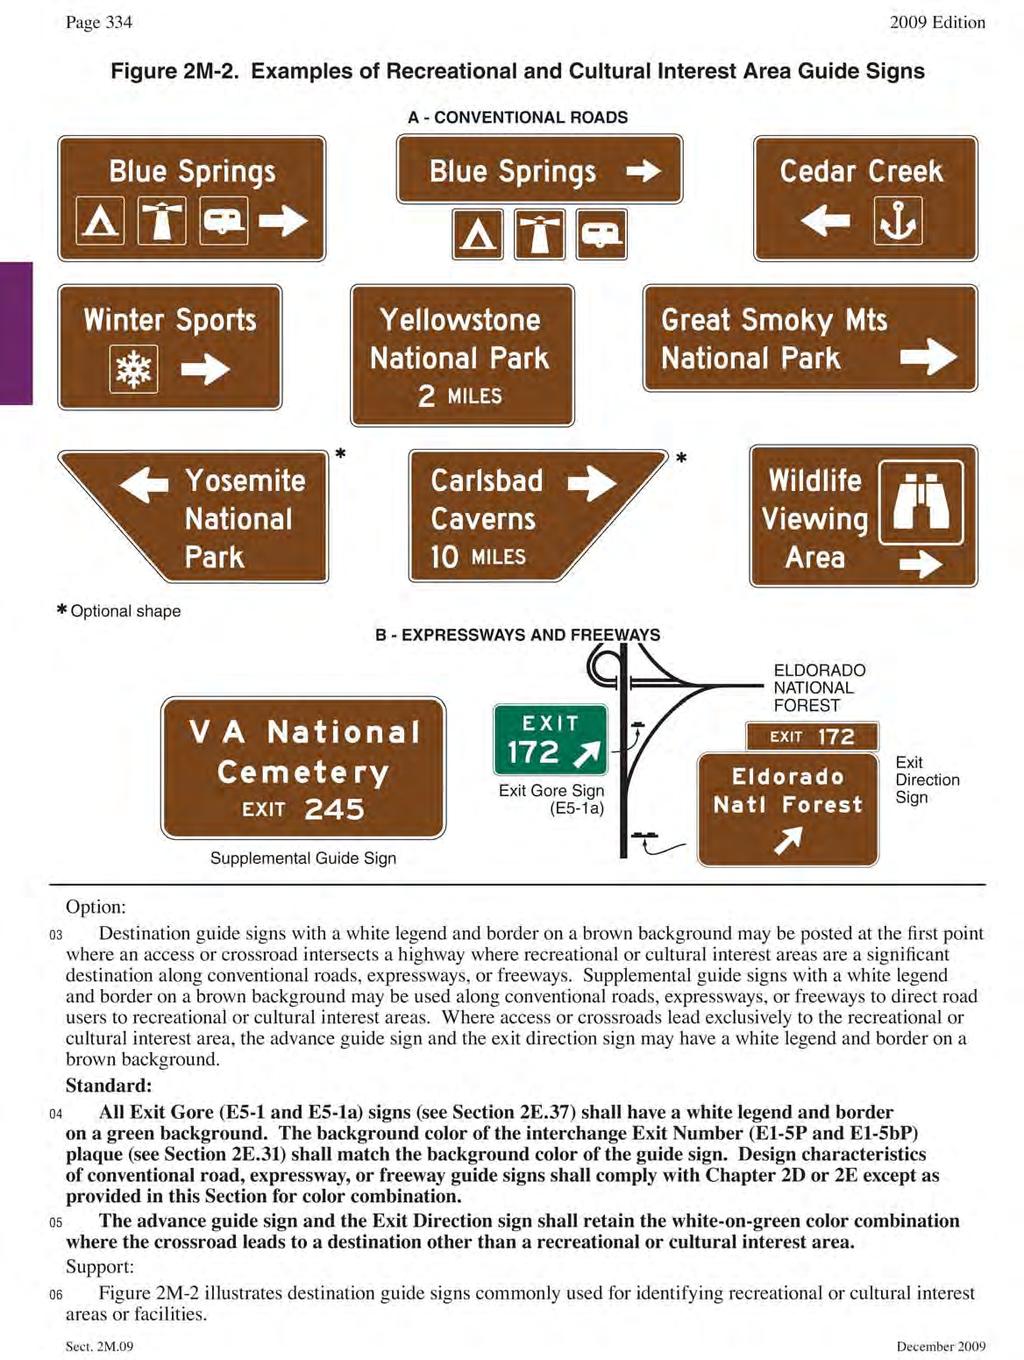 Site Entrance Sign he purpose of this sign is to direct highway users to the entrance of the trailhead as well as to provide information on the activities located at the trailhead. U.S. Department of ransportation Federal Highway Administration Manual on Uniform raffic Control Devices Sign Guidelines: http://mutcd.